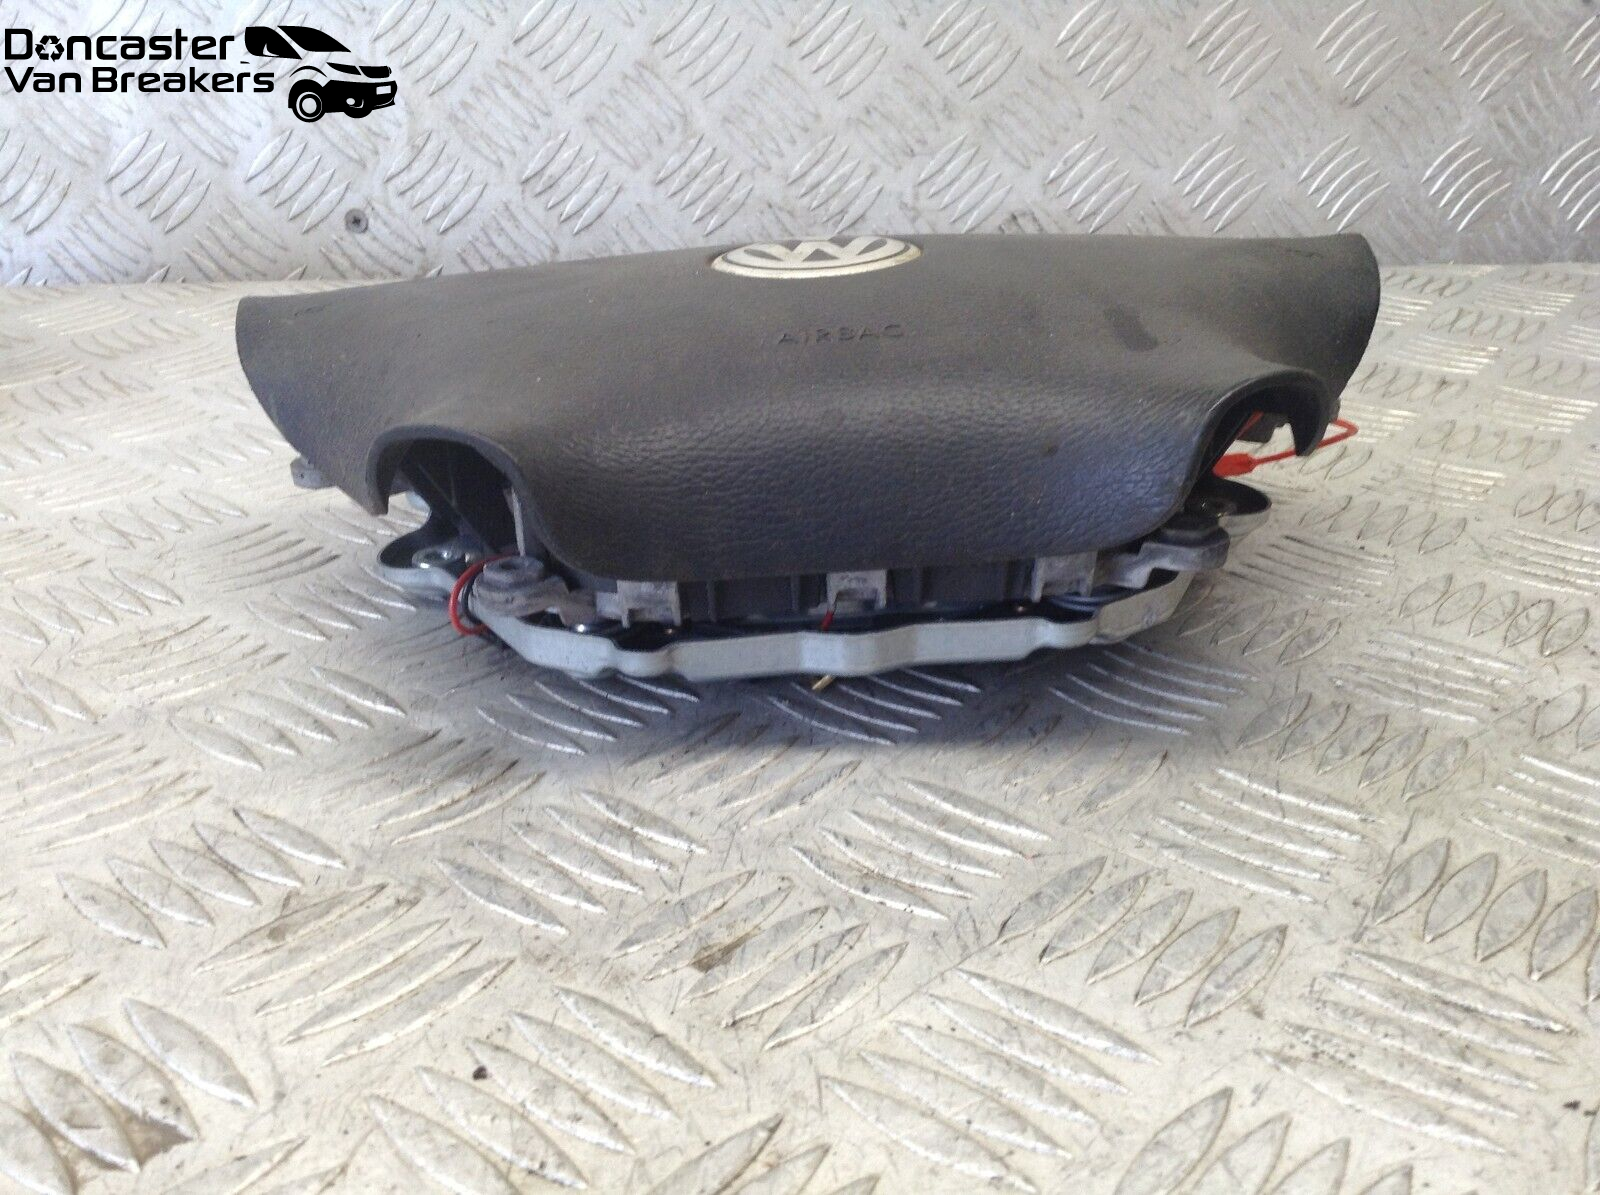 VOLKSWAGGEN CRAFTER DRIVERS STEERING WHEEL DRIVERS AIR BAG